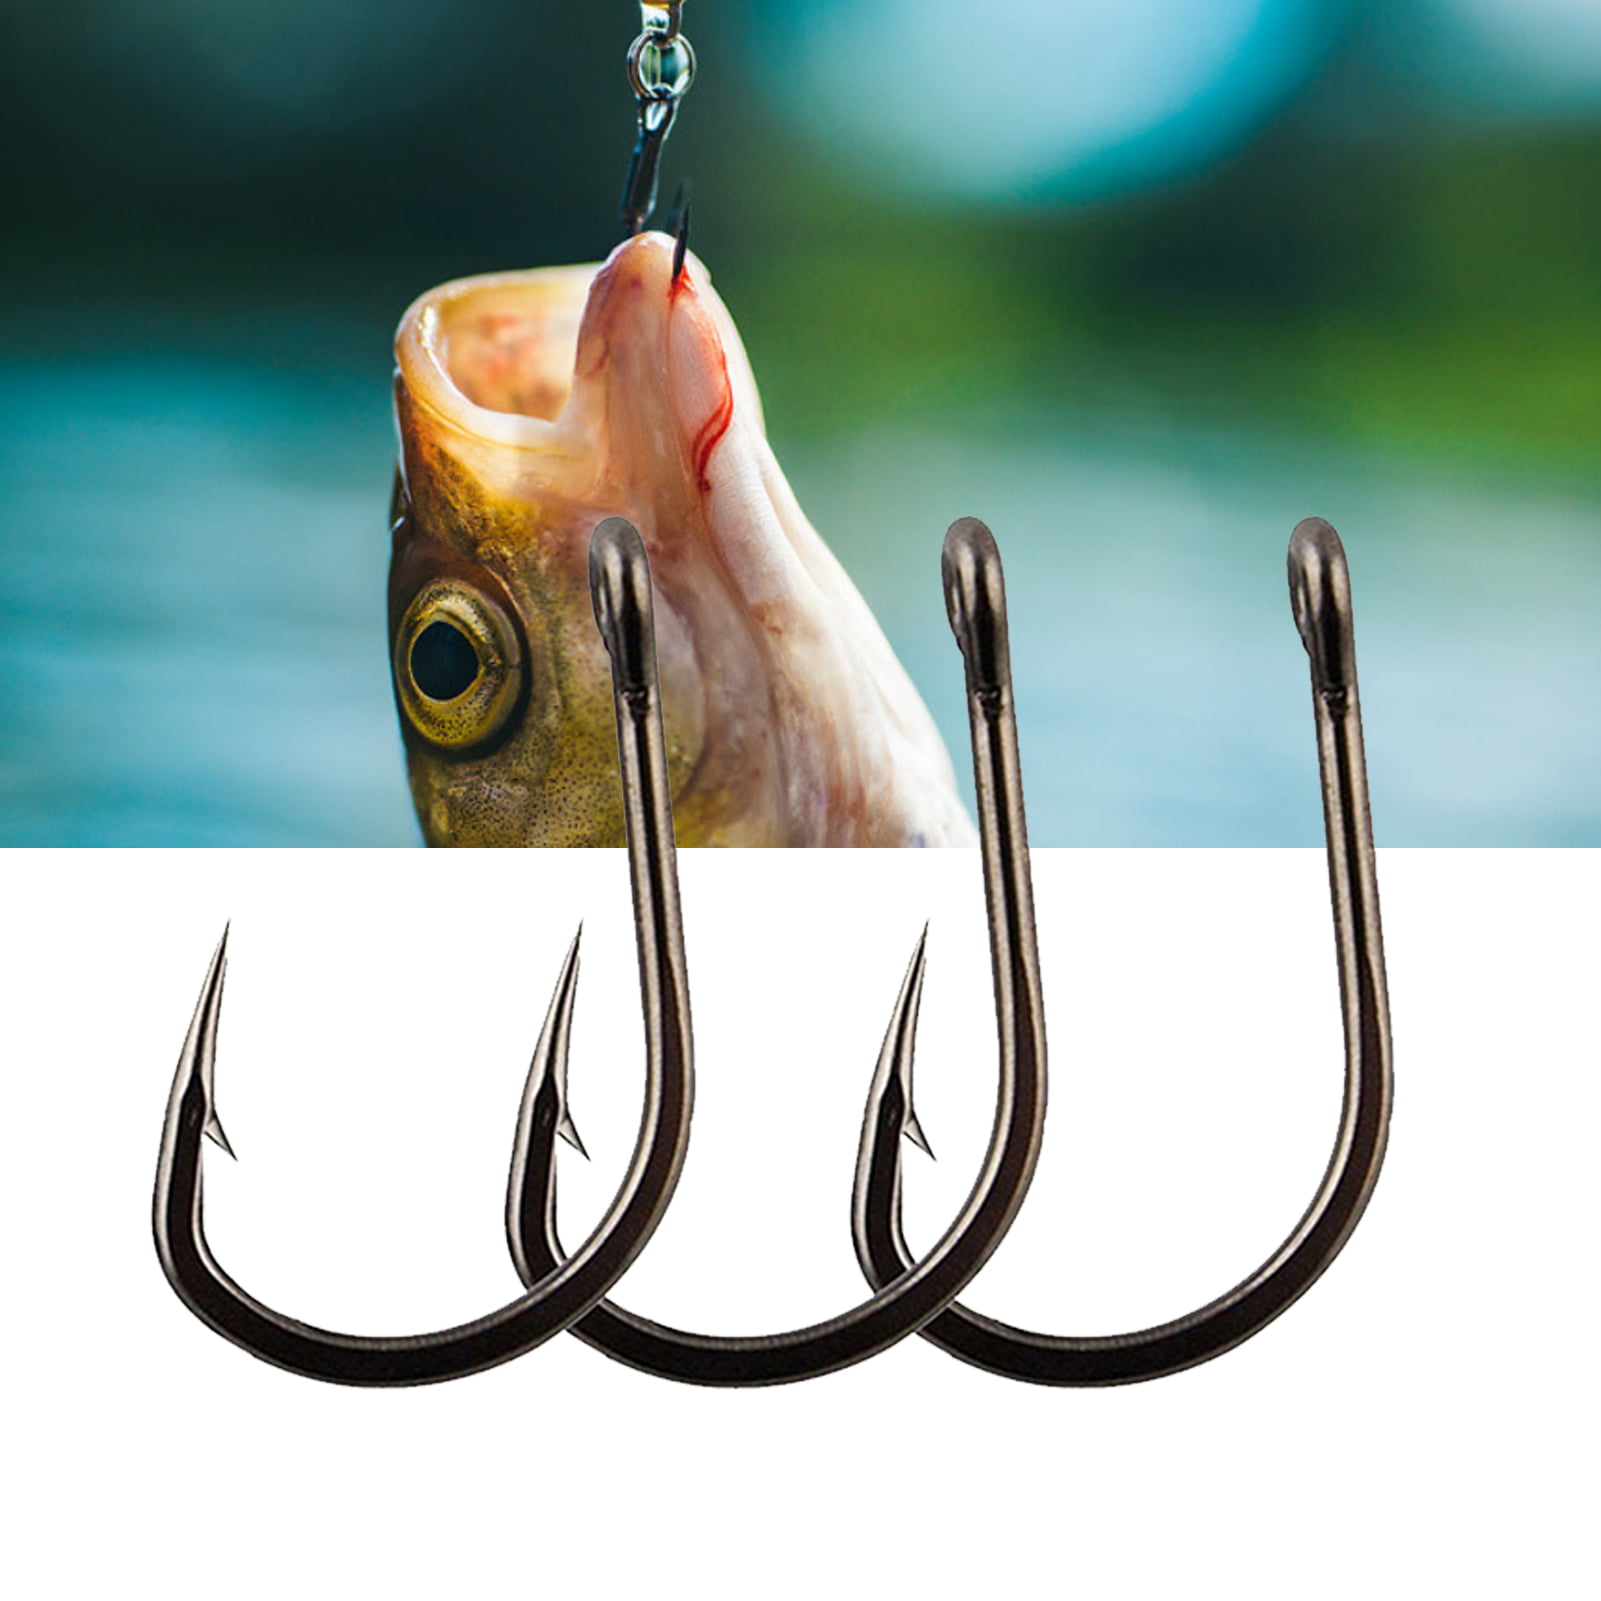 SPRING PARK 100Pcs High Carbon Steel Fishing Hooks，10 Sizes Fishing Hooks  ,Strong Sharp Fish Hook with Barbs for Freshwater/Seawater 